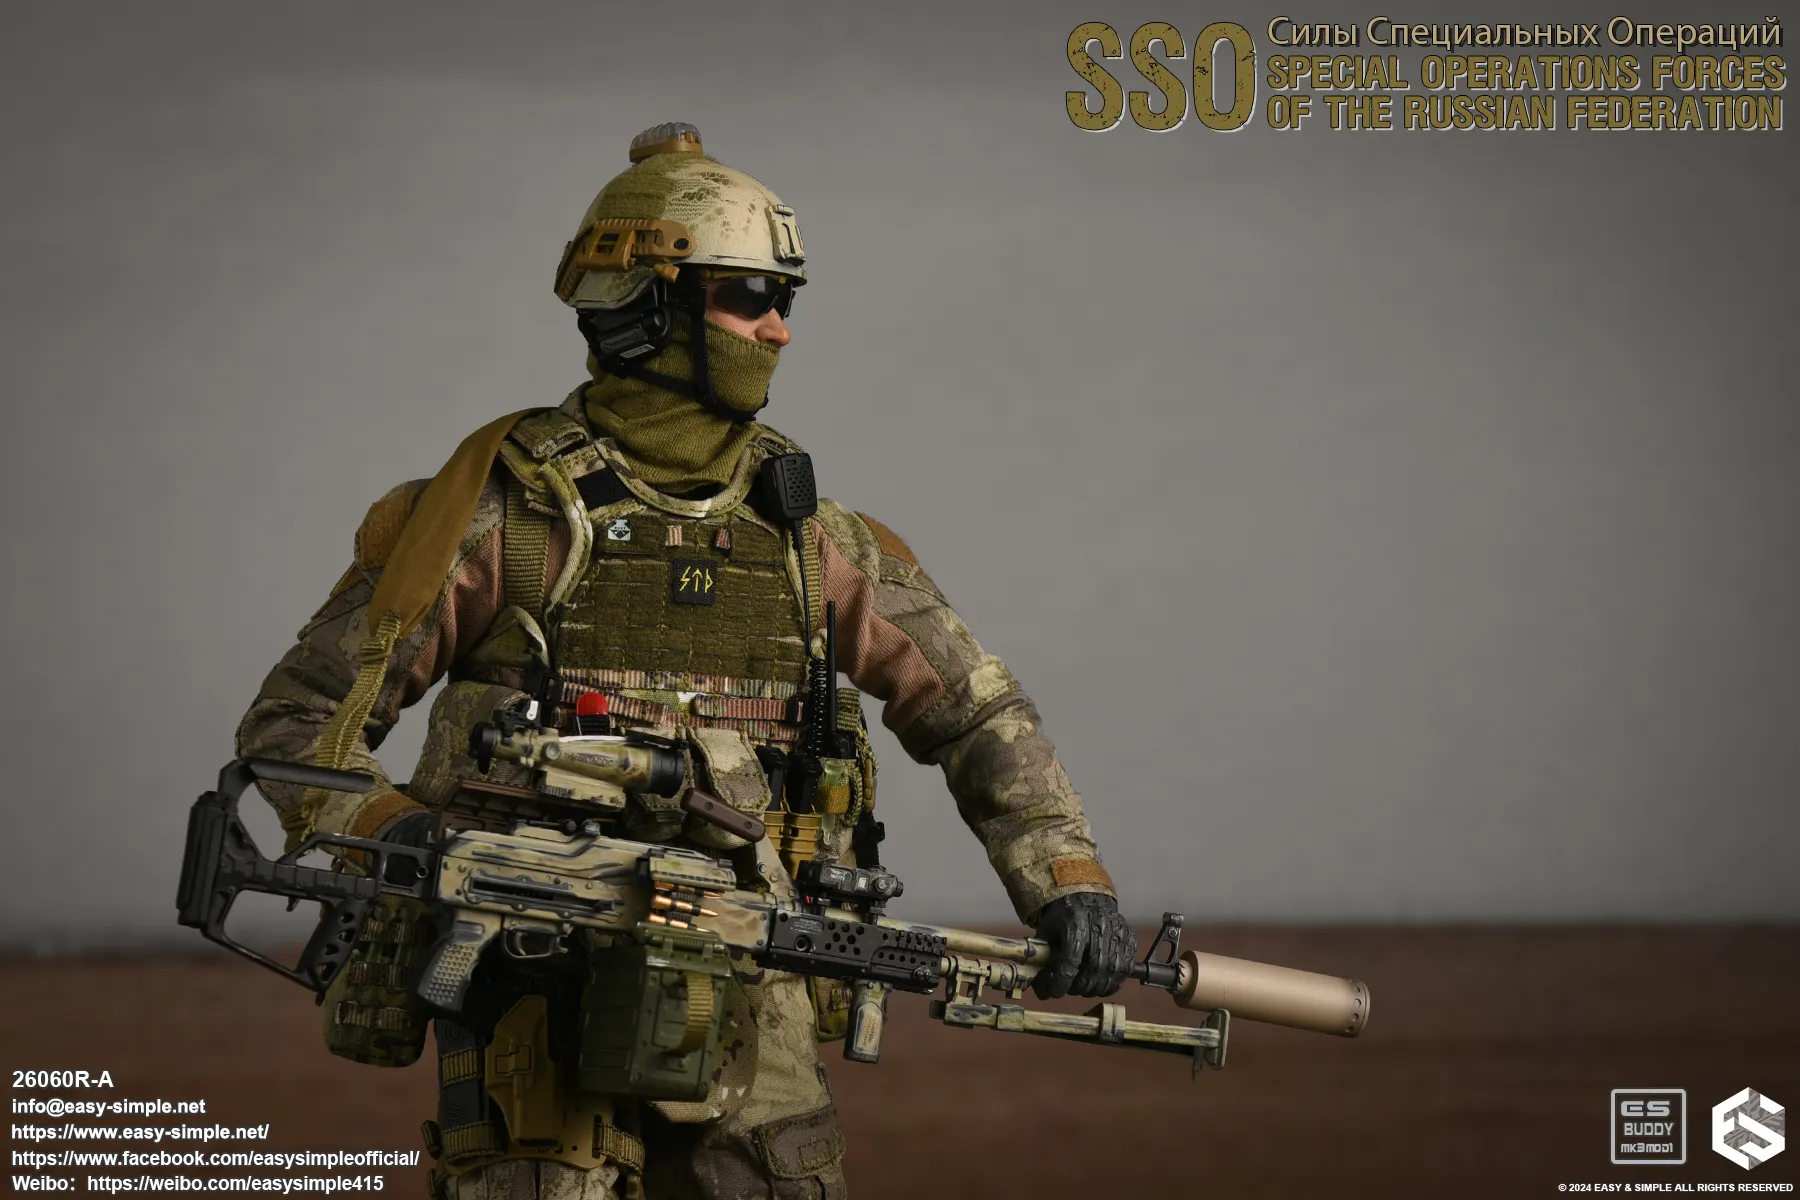 operations - NEW PRODUCT: Easy&Simple 26060R-A Russian Special Operations Forces (SSO) Format,webp